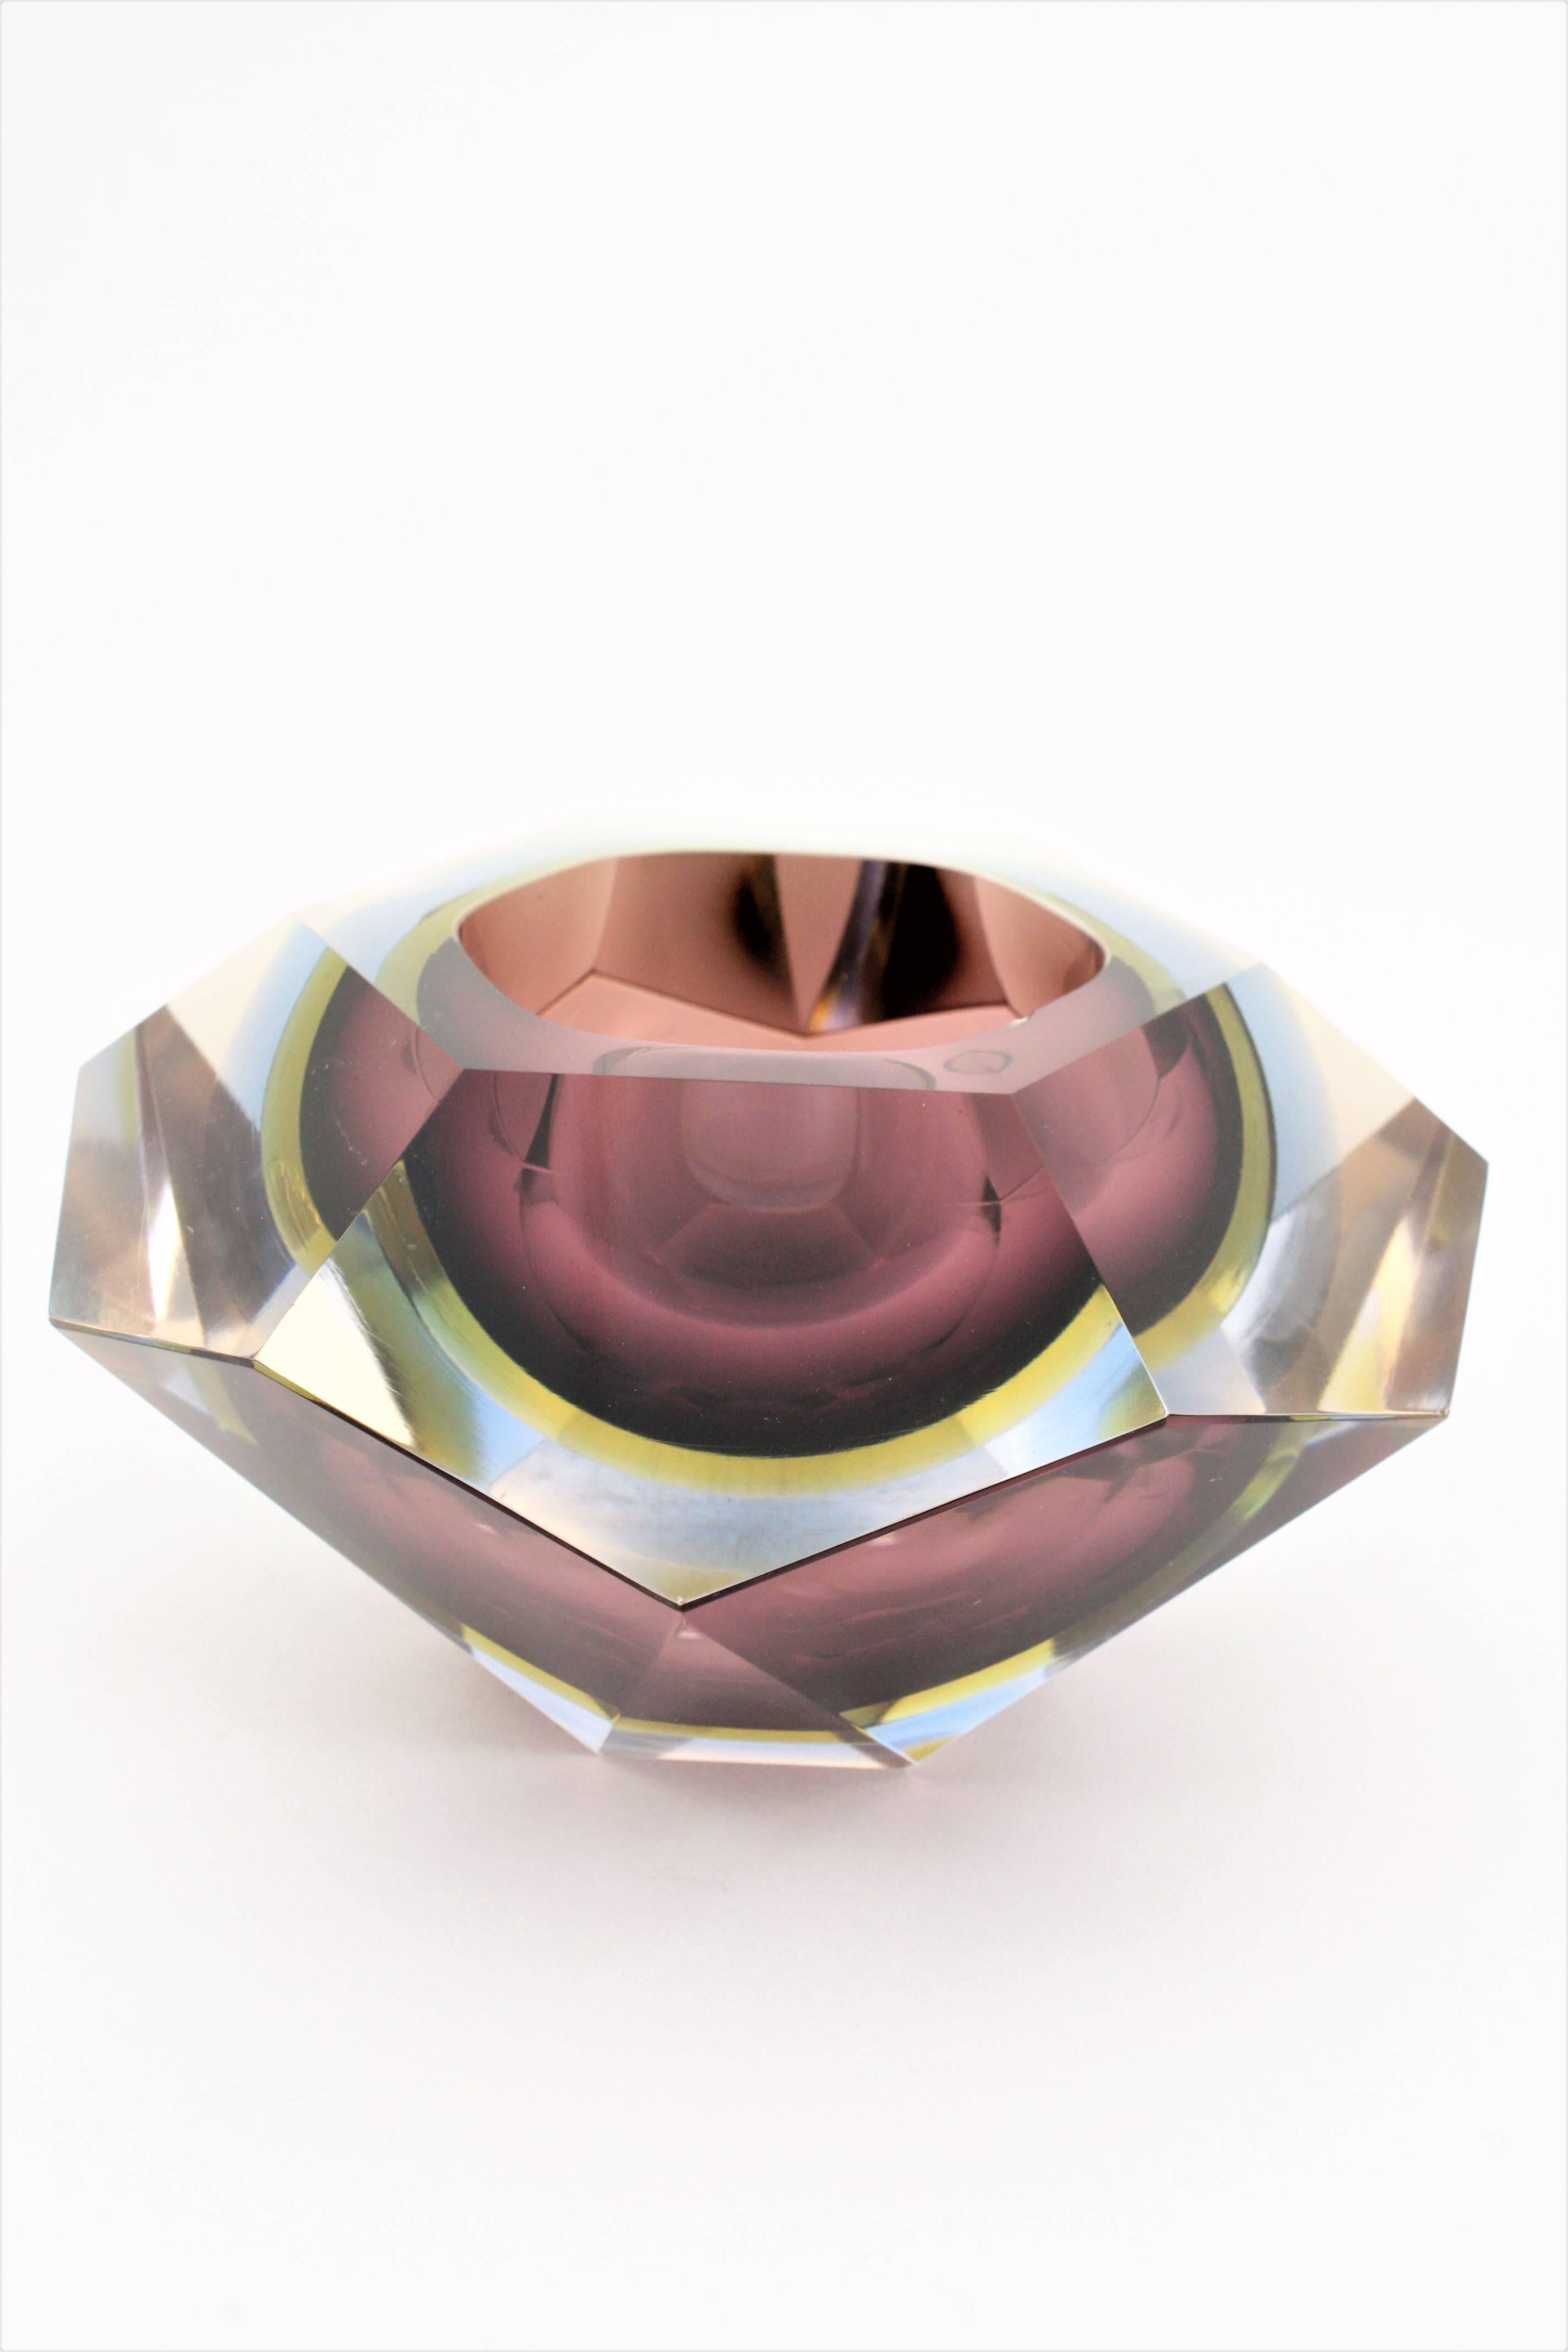 A monumental Sommerso faceted Murano glass bowl or centerpiece. Garnet, yellow and blue triple cased glass in clear class, faceted diamond shape and an unusual extra large size. This is the bigger size in this design we have ever seen. Attributed to